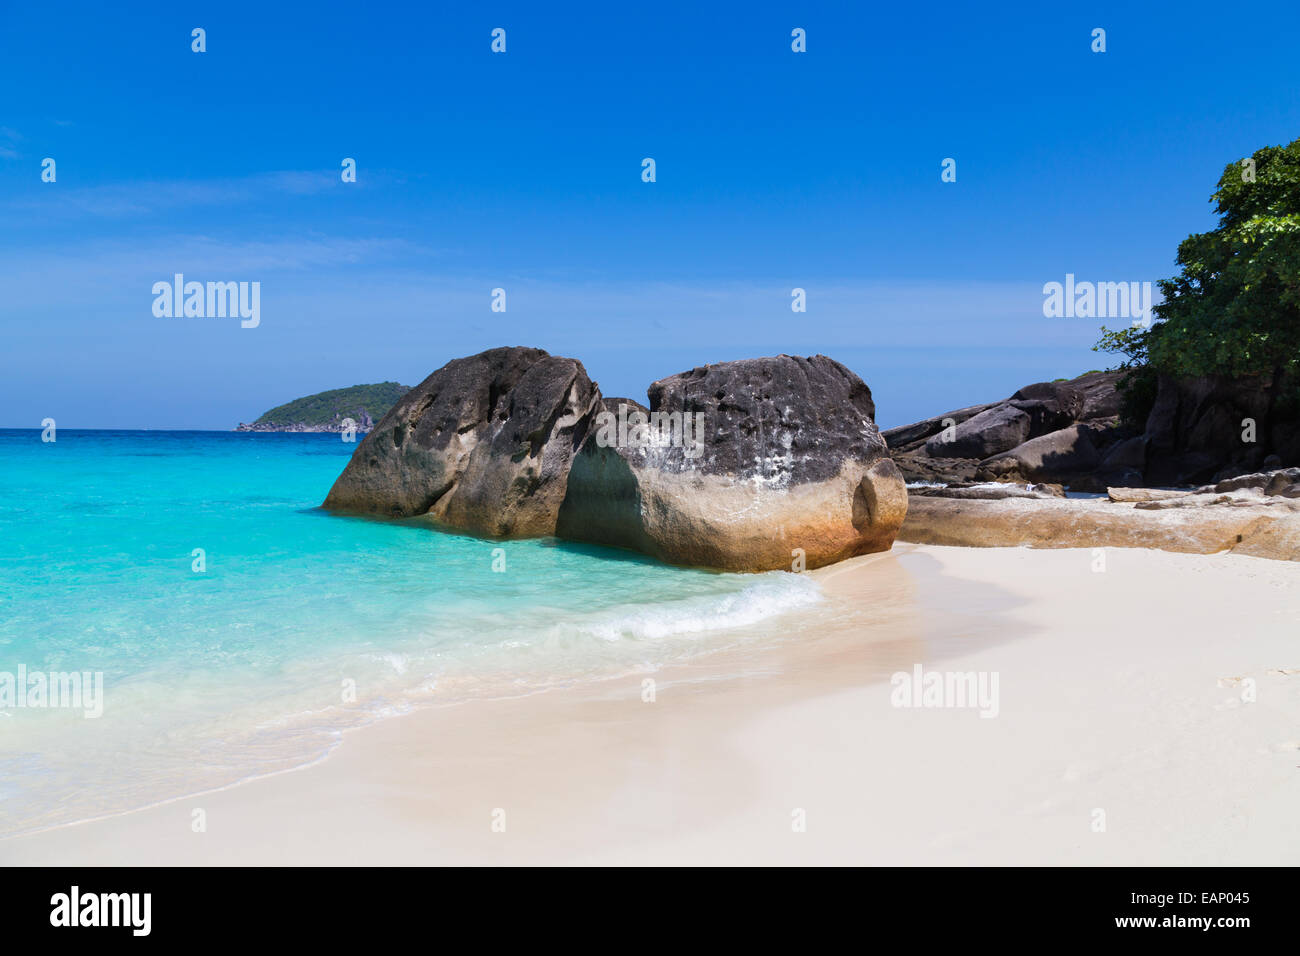 White sand beach and turquoise blue sea under a blue sky. Stock Photo